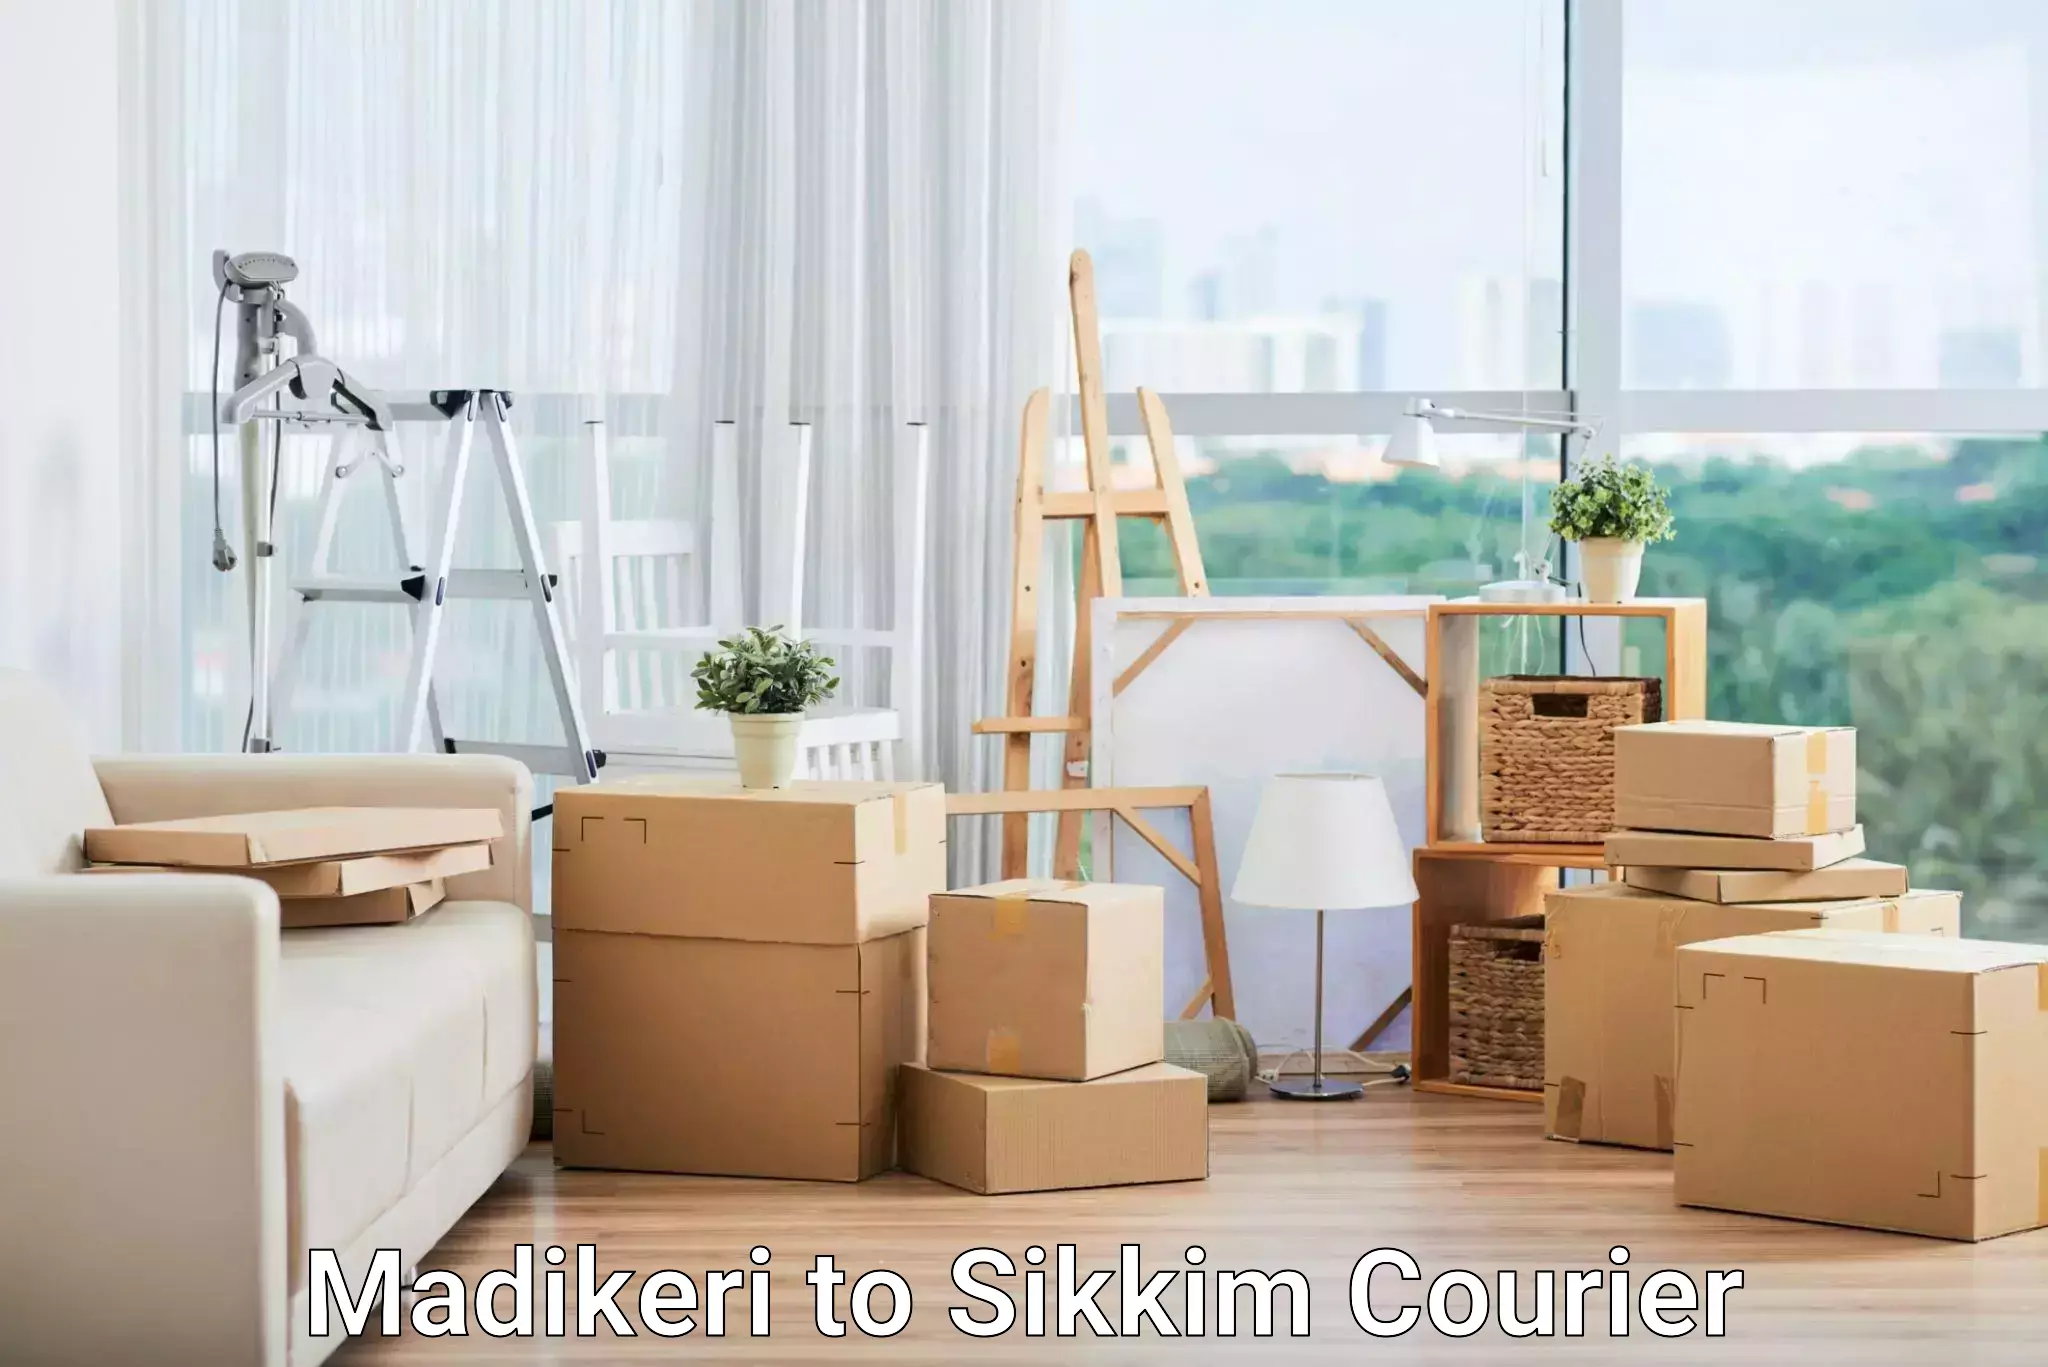 Fast-track shipping solutions Madikeri to Gangtok